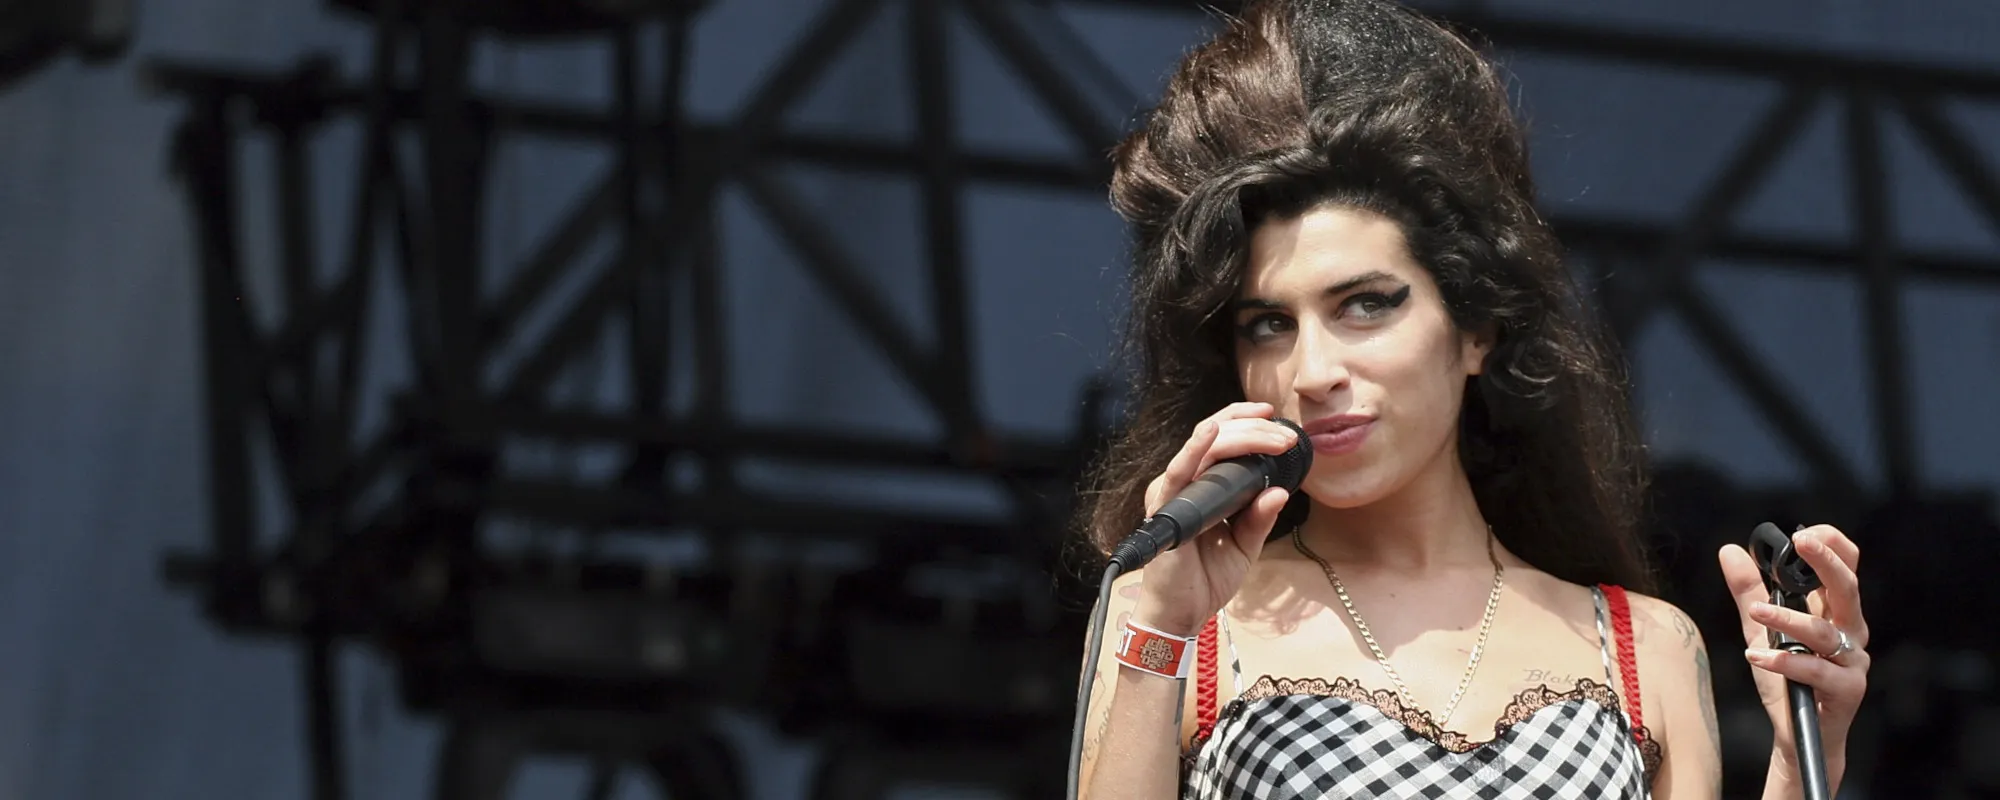 Amy Winehouse Memorabilia Auction Results in $4 Million for Charity and Winehouse Estate